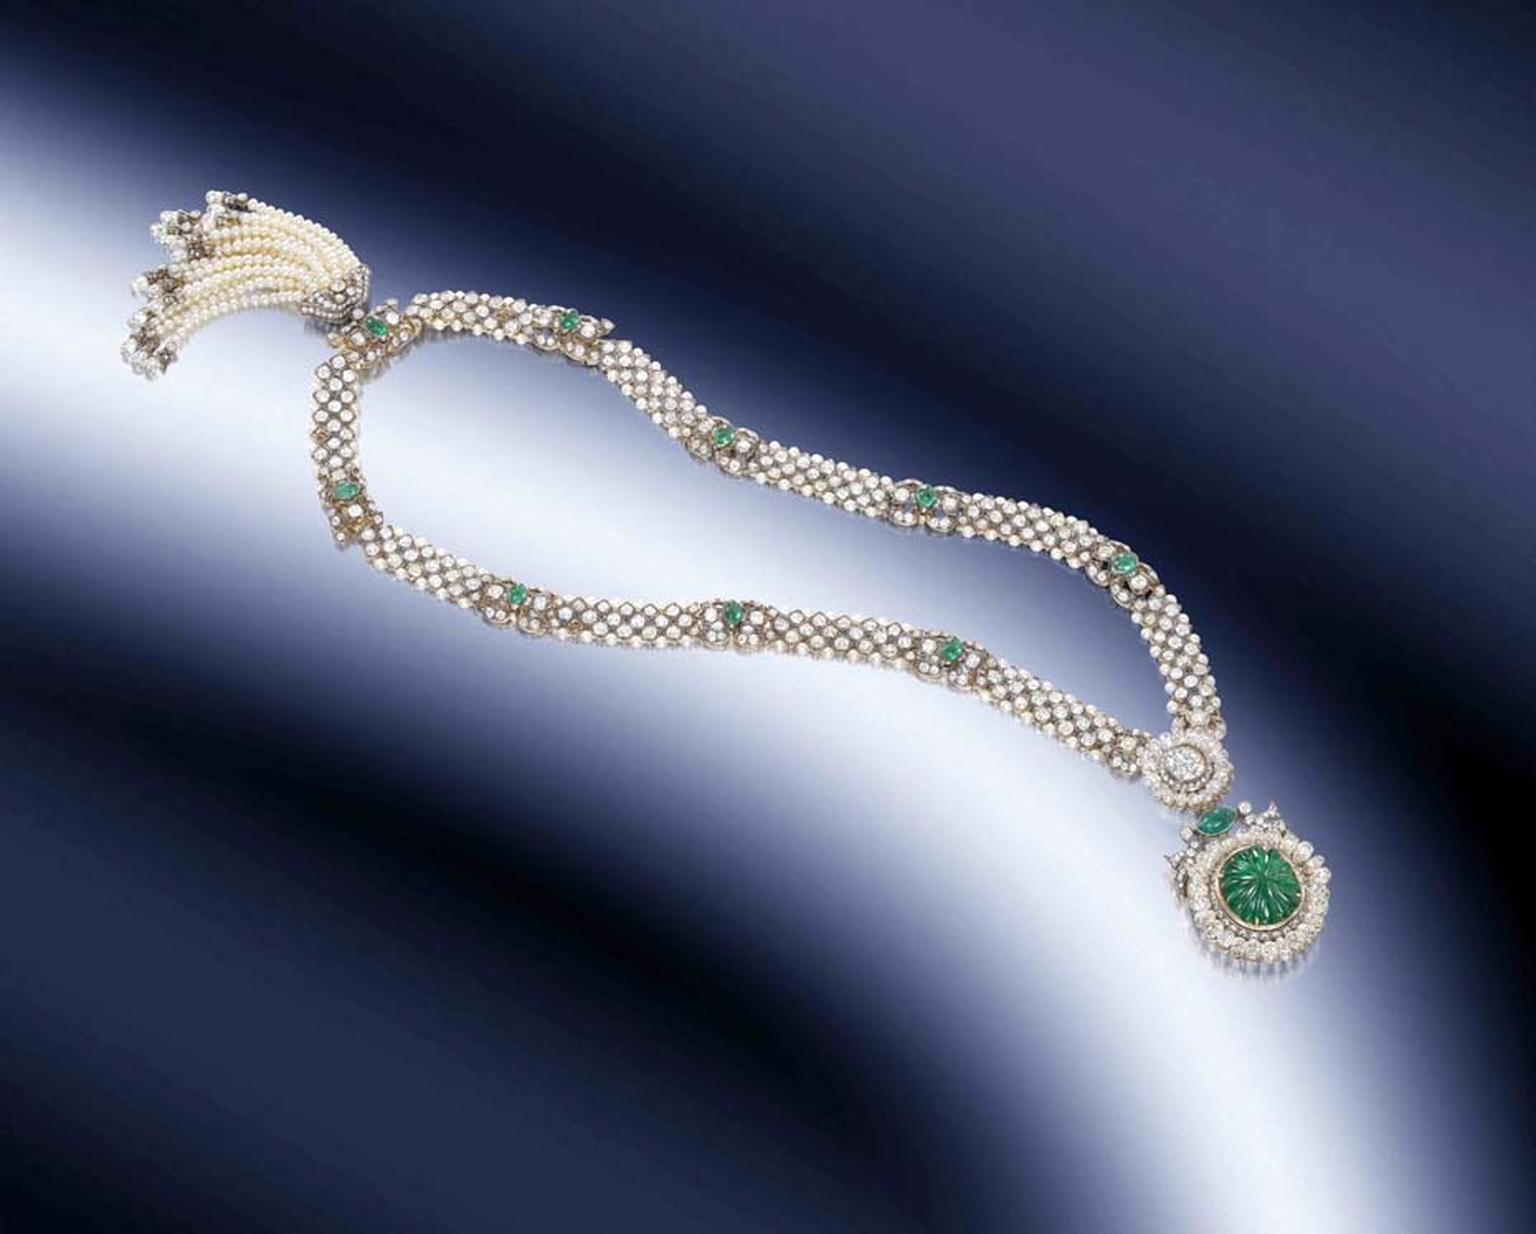 The one-of-a-kind necklace to be sold by Bonhams London this December was crafted in 1911 from the finest emeralds, pearls and diamonds and was likely to have been worn at the famous Delhi Durbar of the same year.